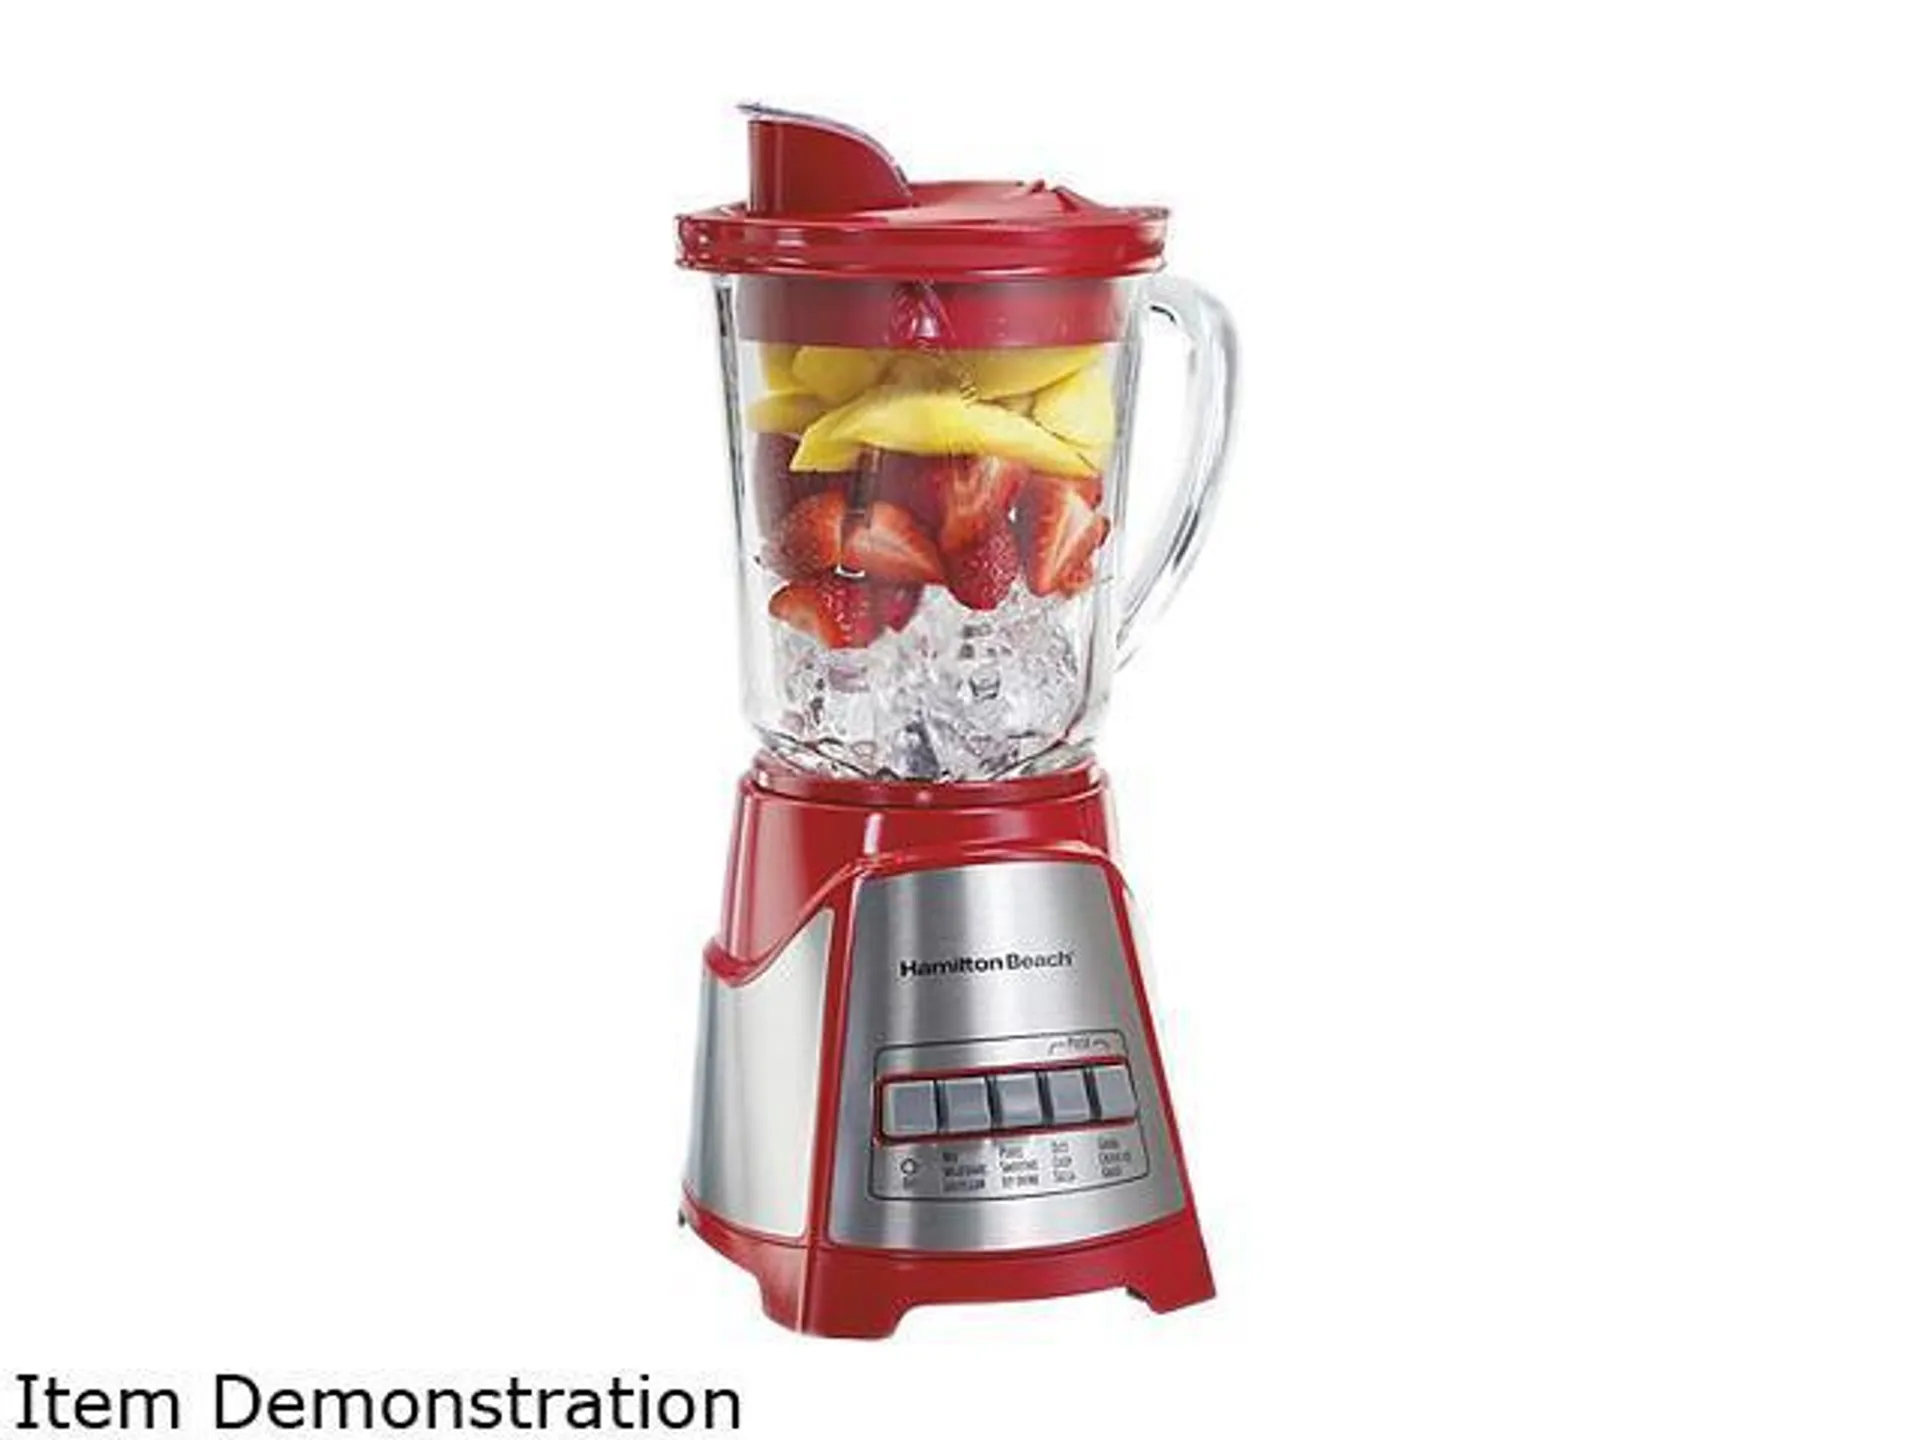 Hamilton Beach 58147 Multi-Function Blender with Mess-free 40oz Glass Jar, Red